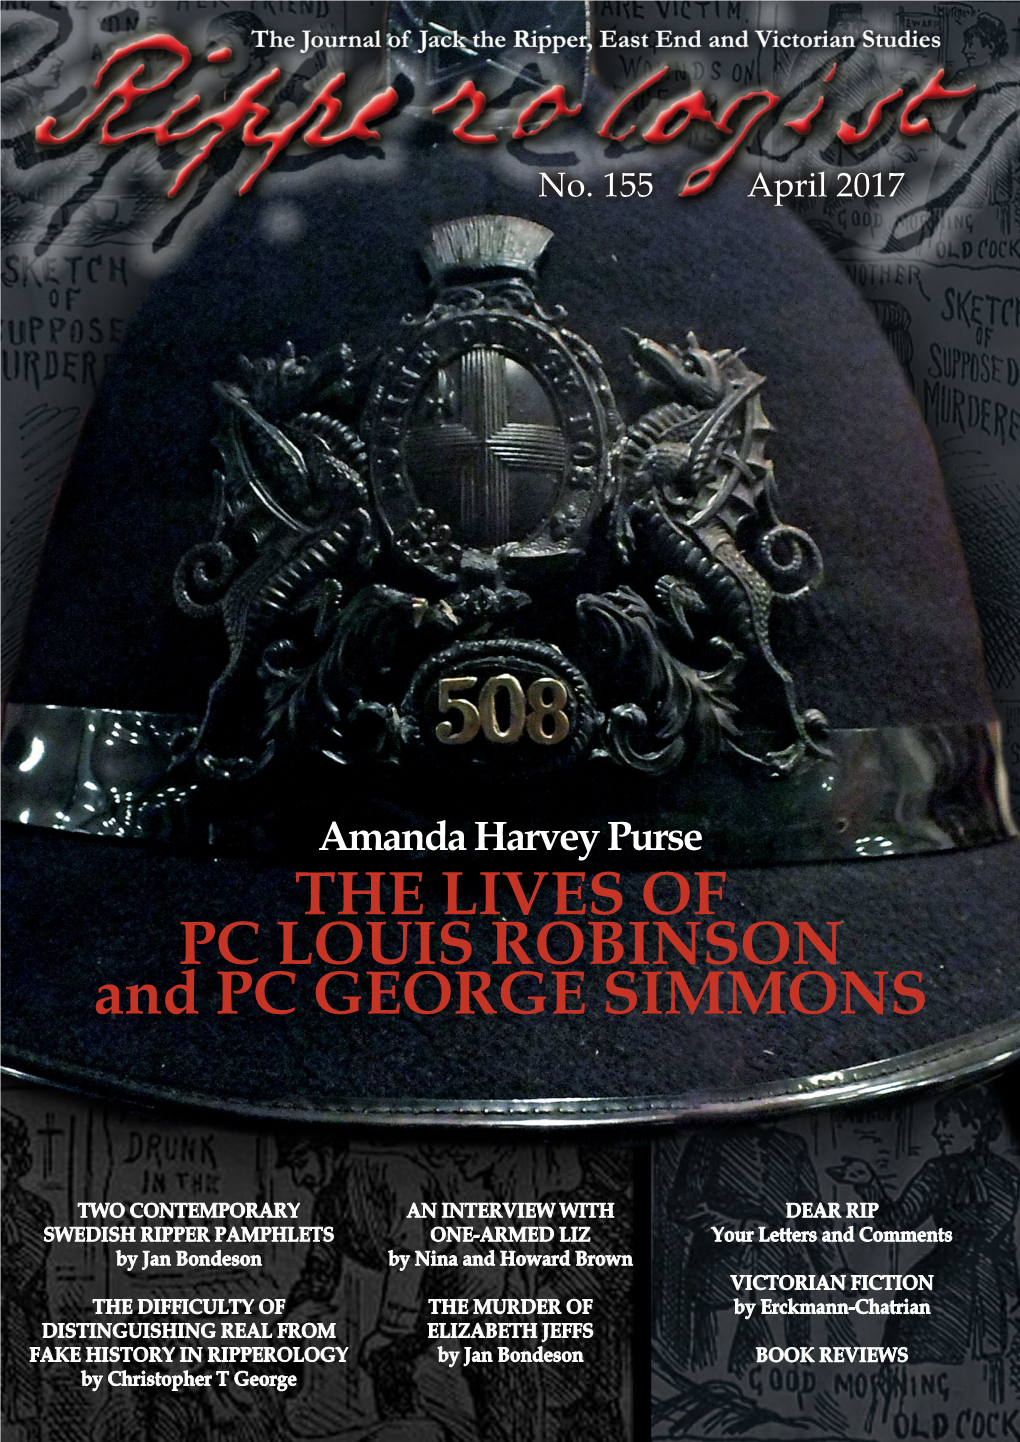 THE LIVES of PC LOUIS ROBINSON and PC GEORGE SIMMONS